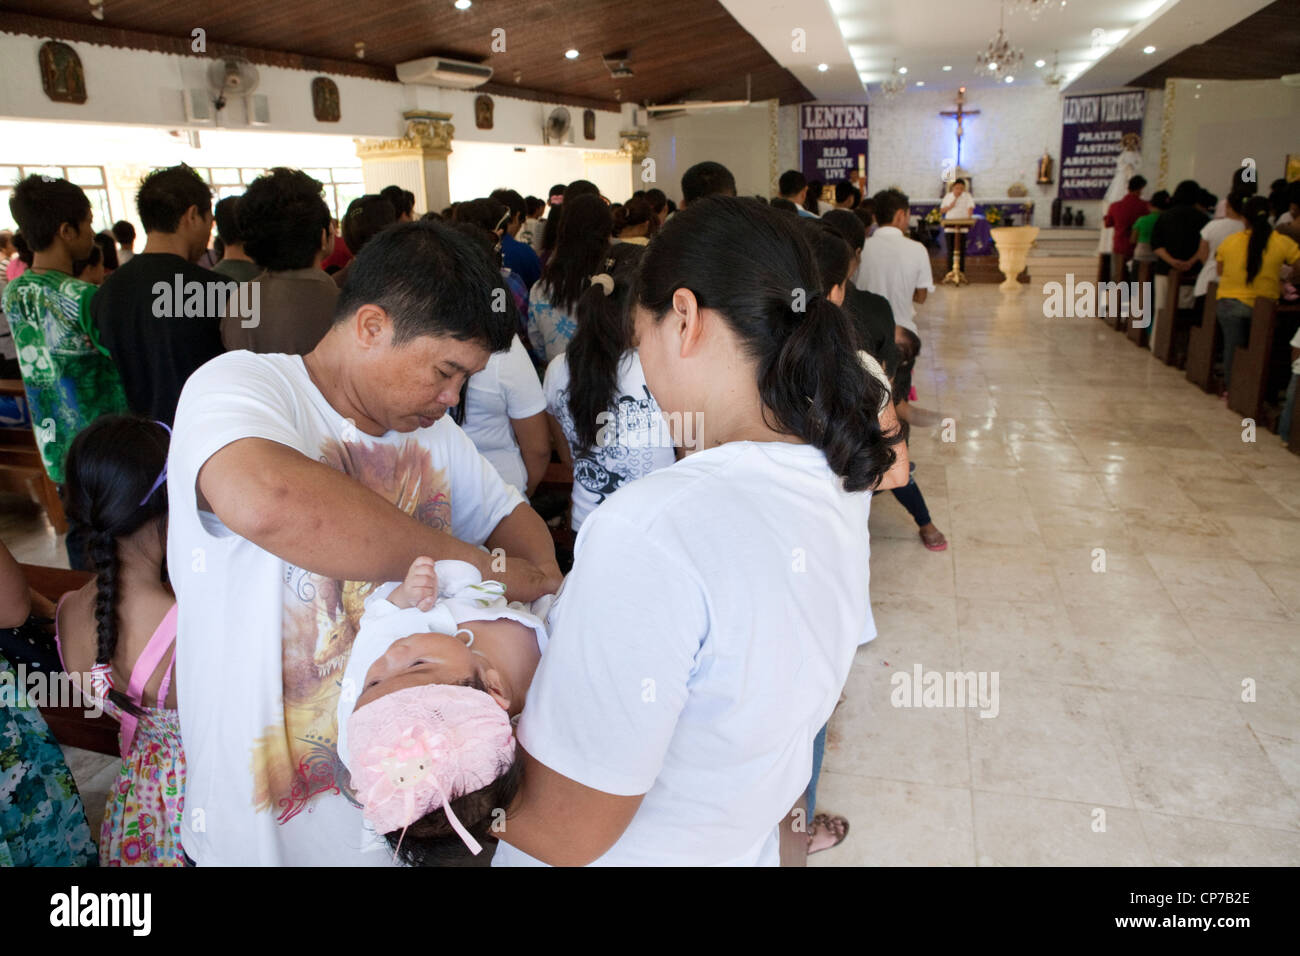 Lapu Lapu City Philippines 26 02 12 0 300 Babies Being Baptised In A Single 3 Hour Ceremony At Mactan Air Base Chapel Stock Photo Alamy